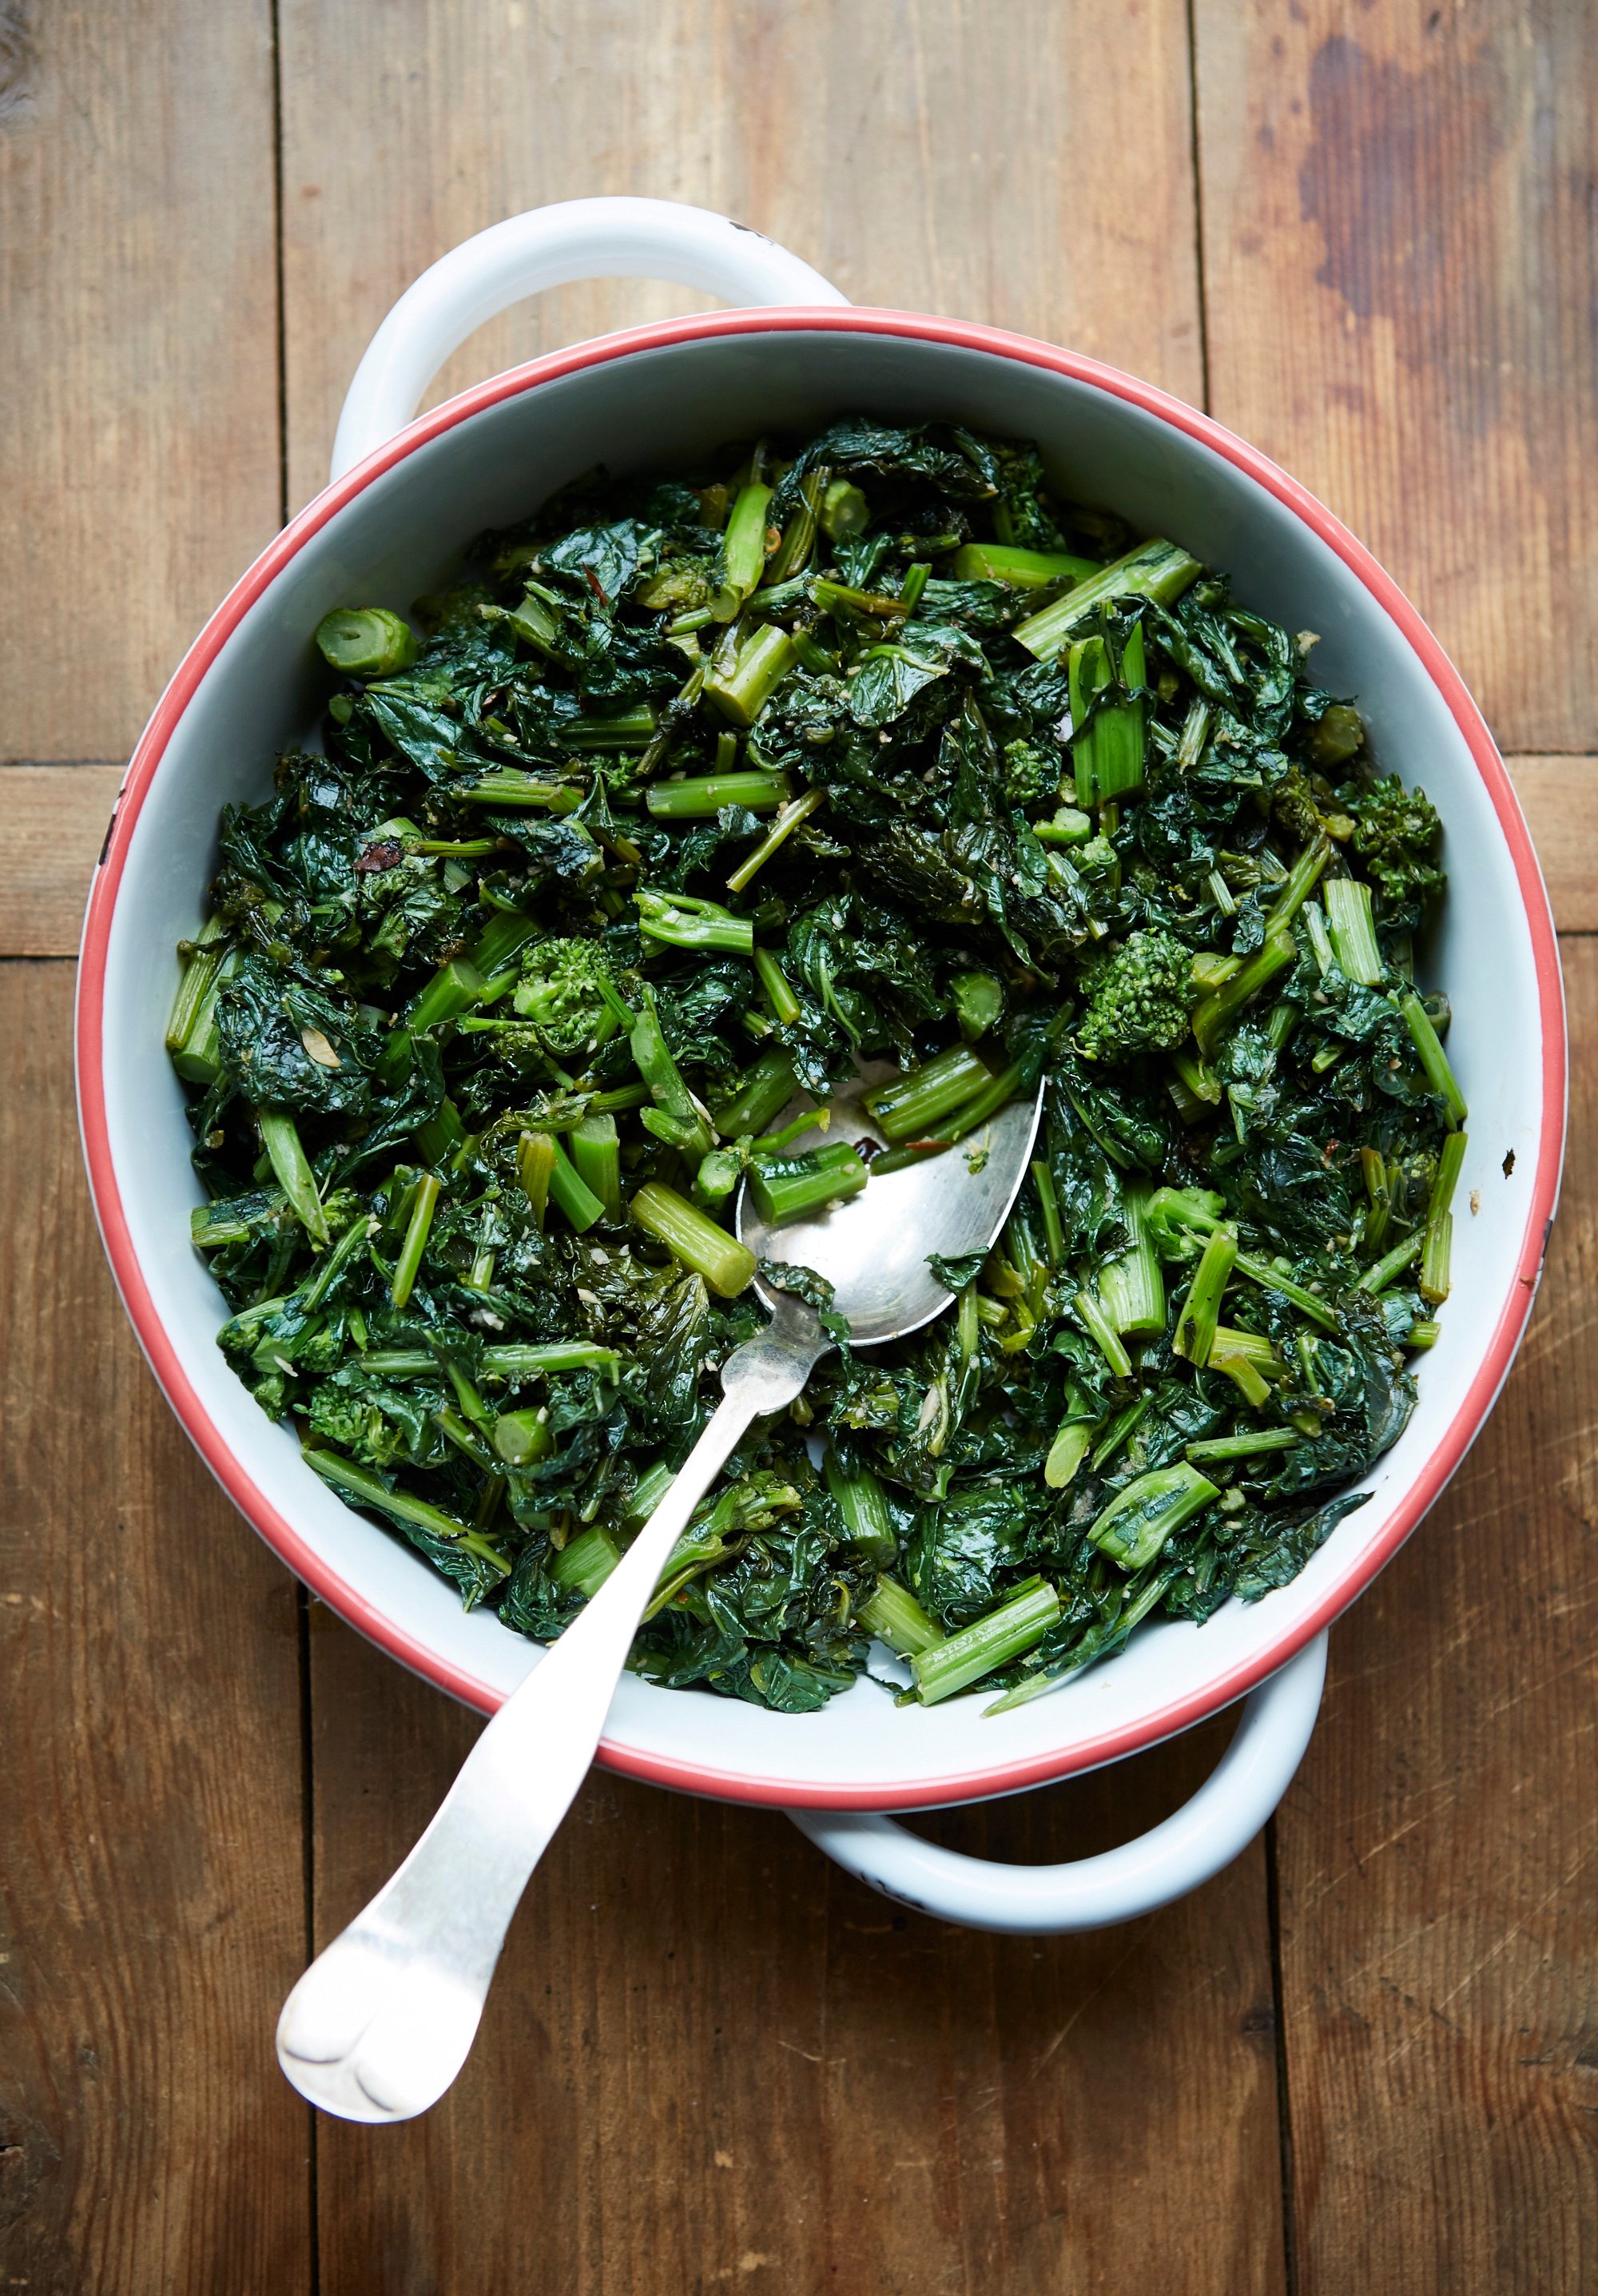 Sautéed Broccoli Rabe in white pan with spoon.